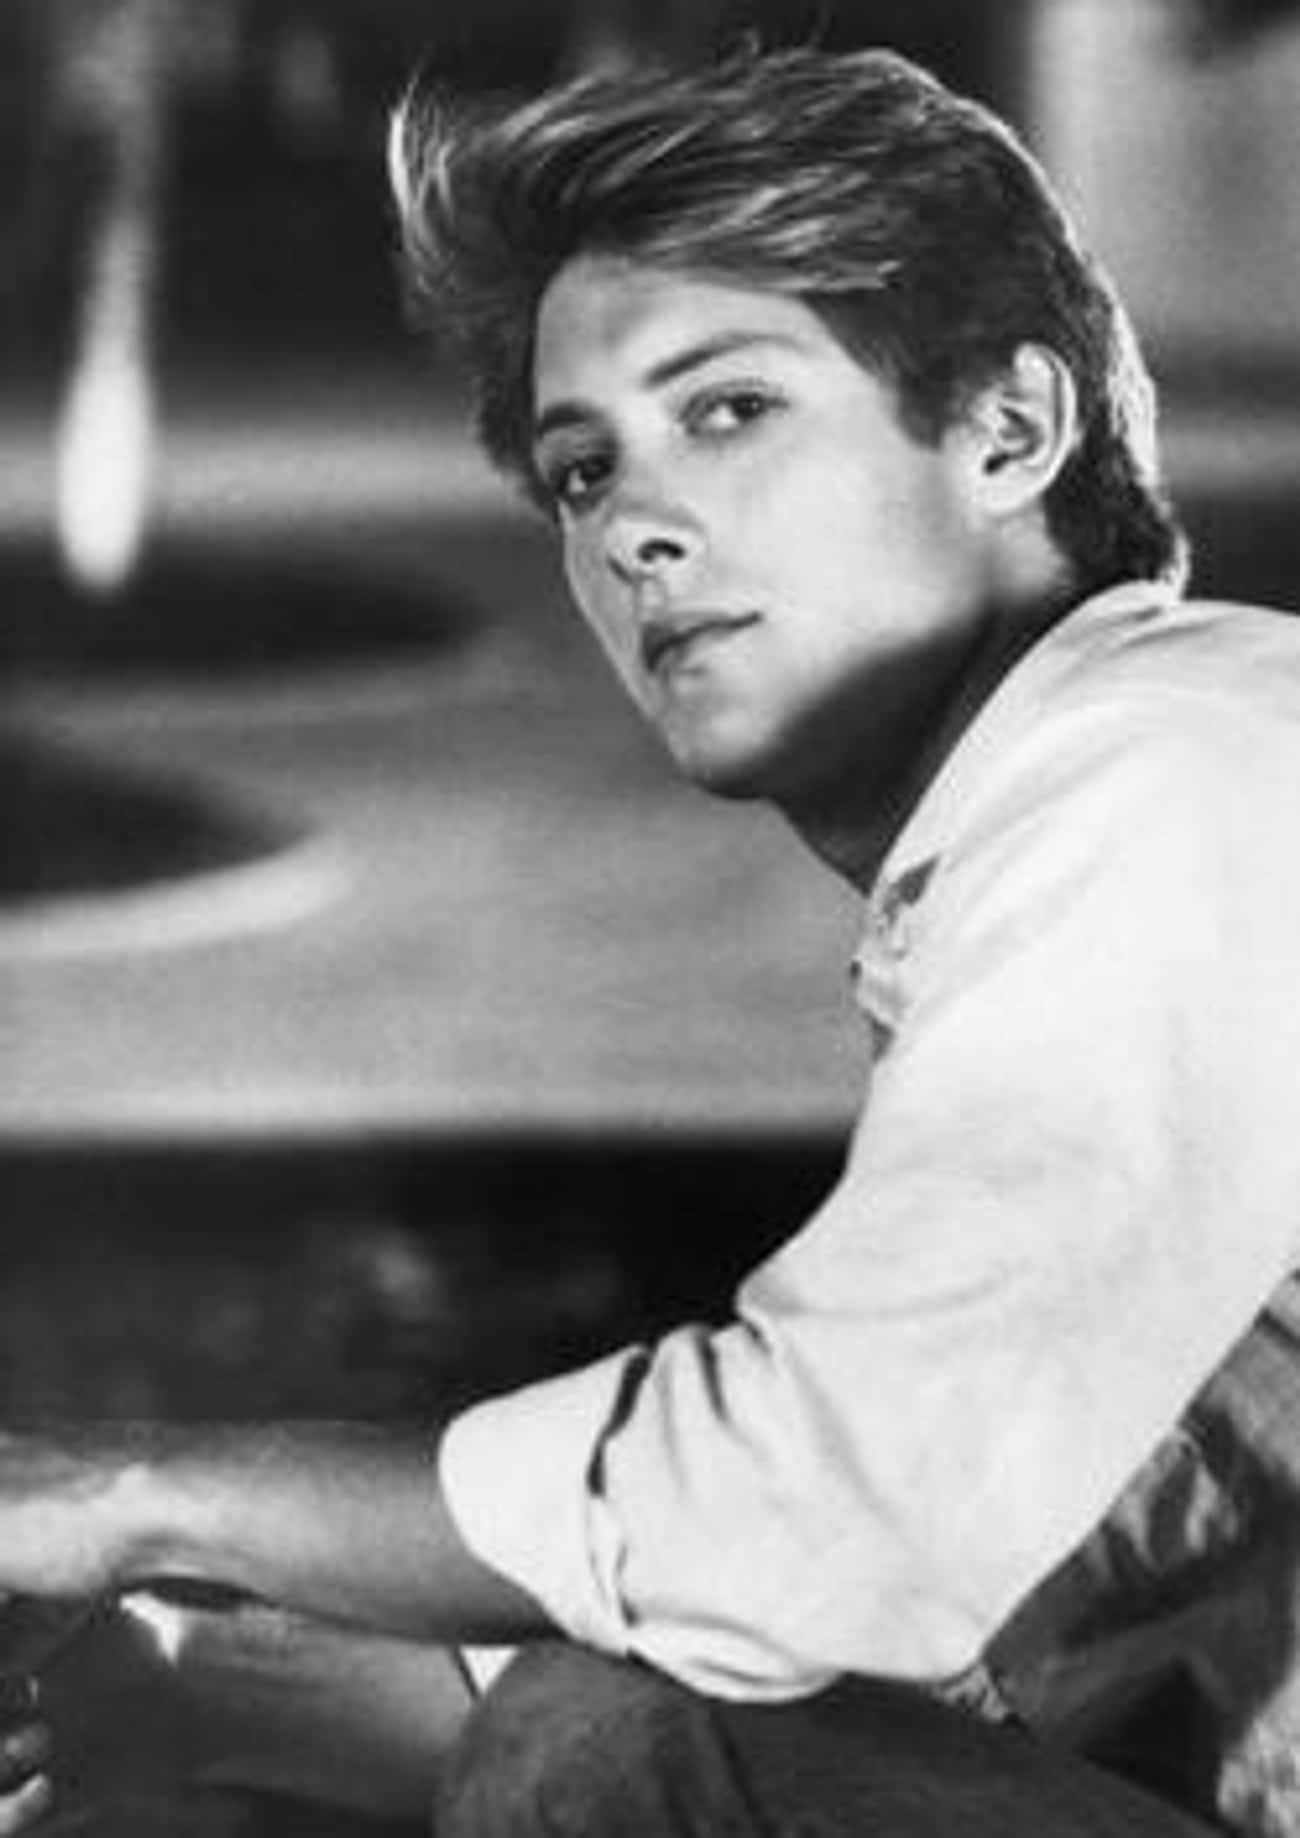 Young James Spader in White Buttondown and Black Jeans